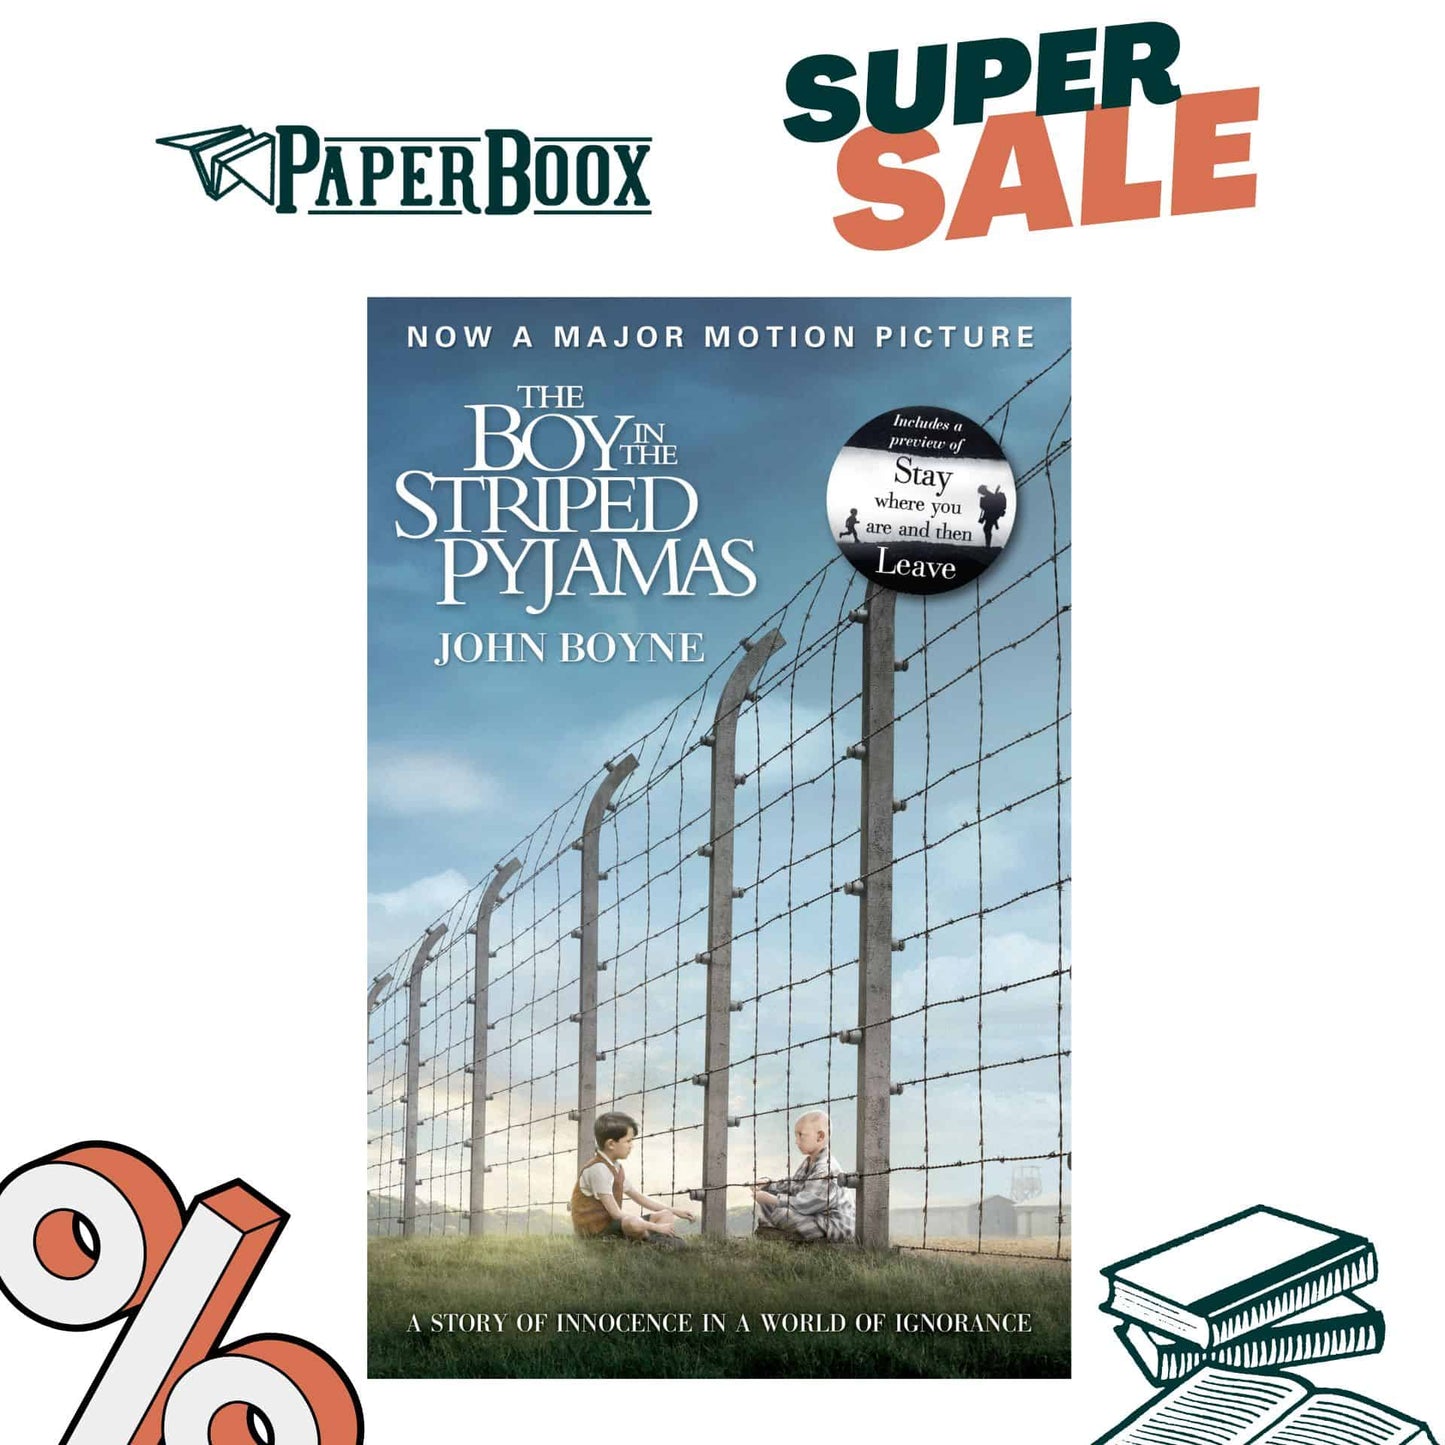 [SALE] The Boy in the Striped Pajamas (Paperback)